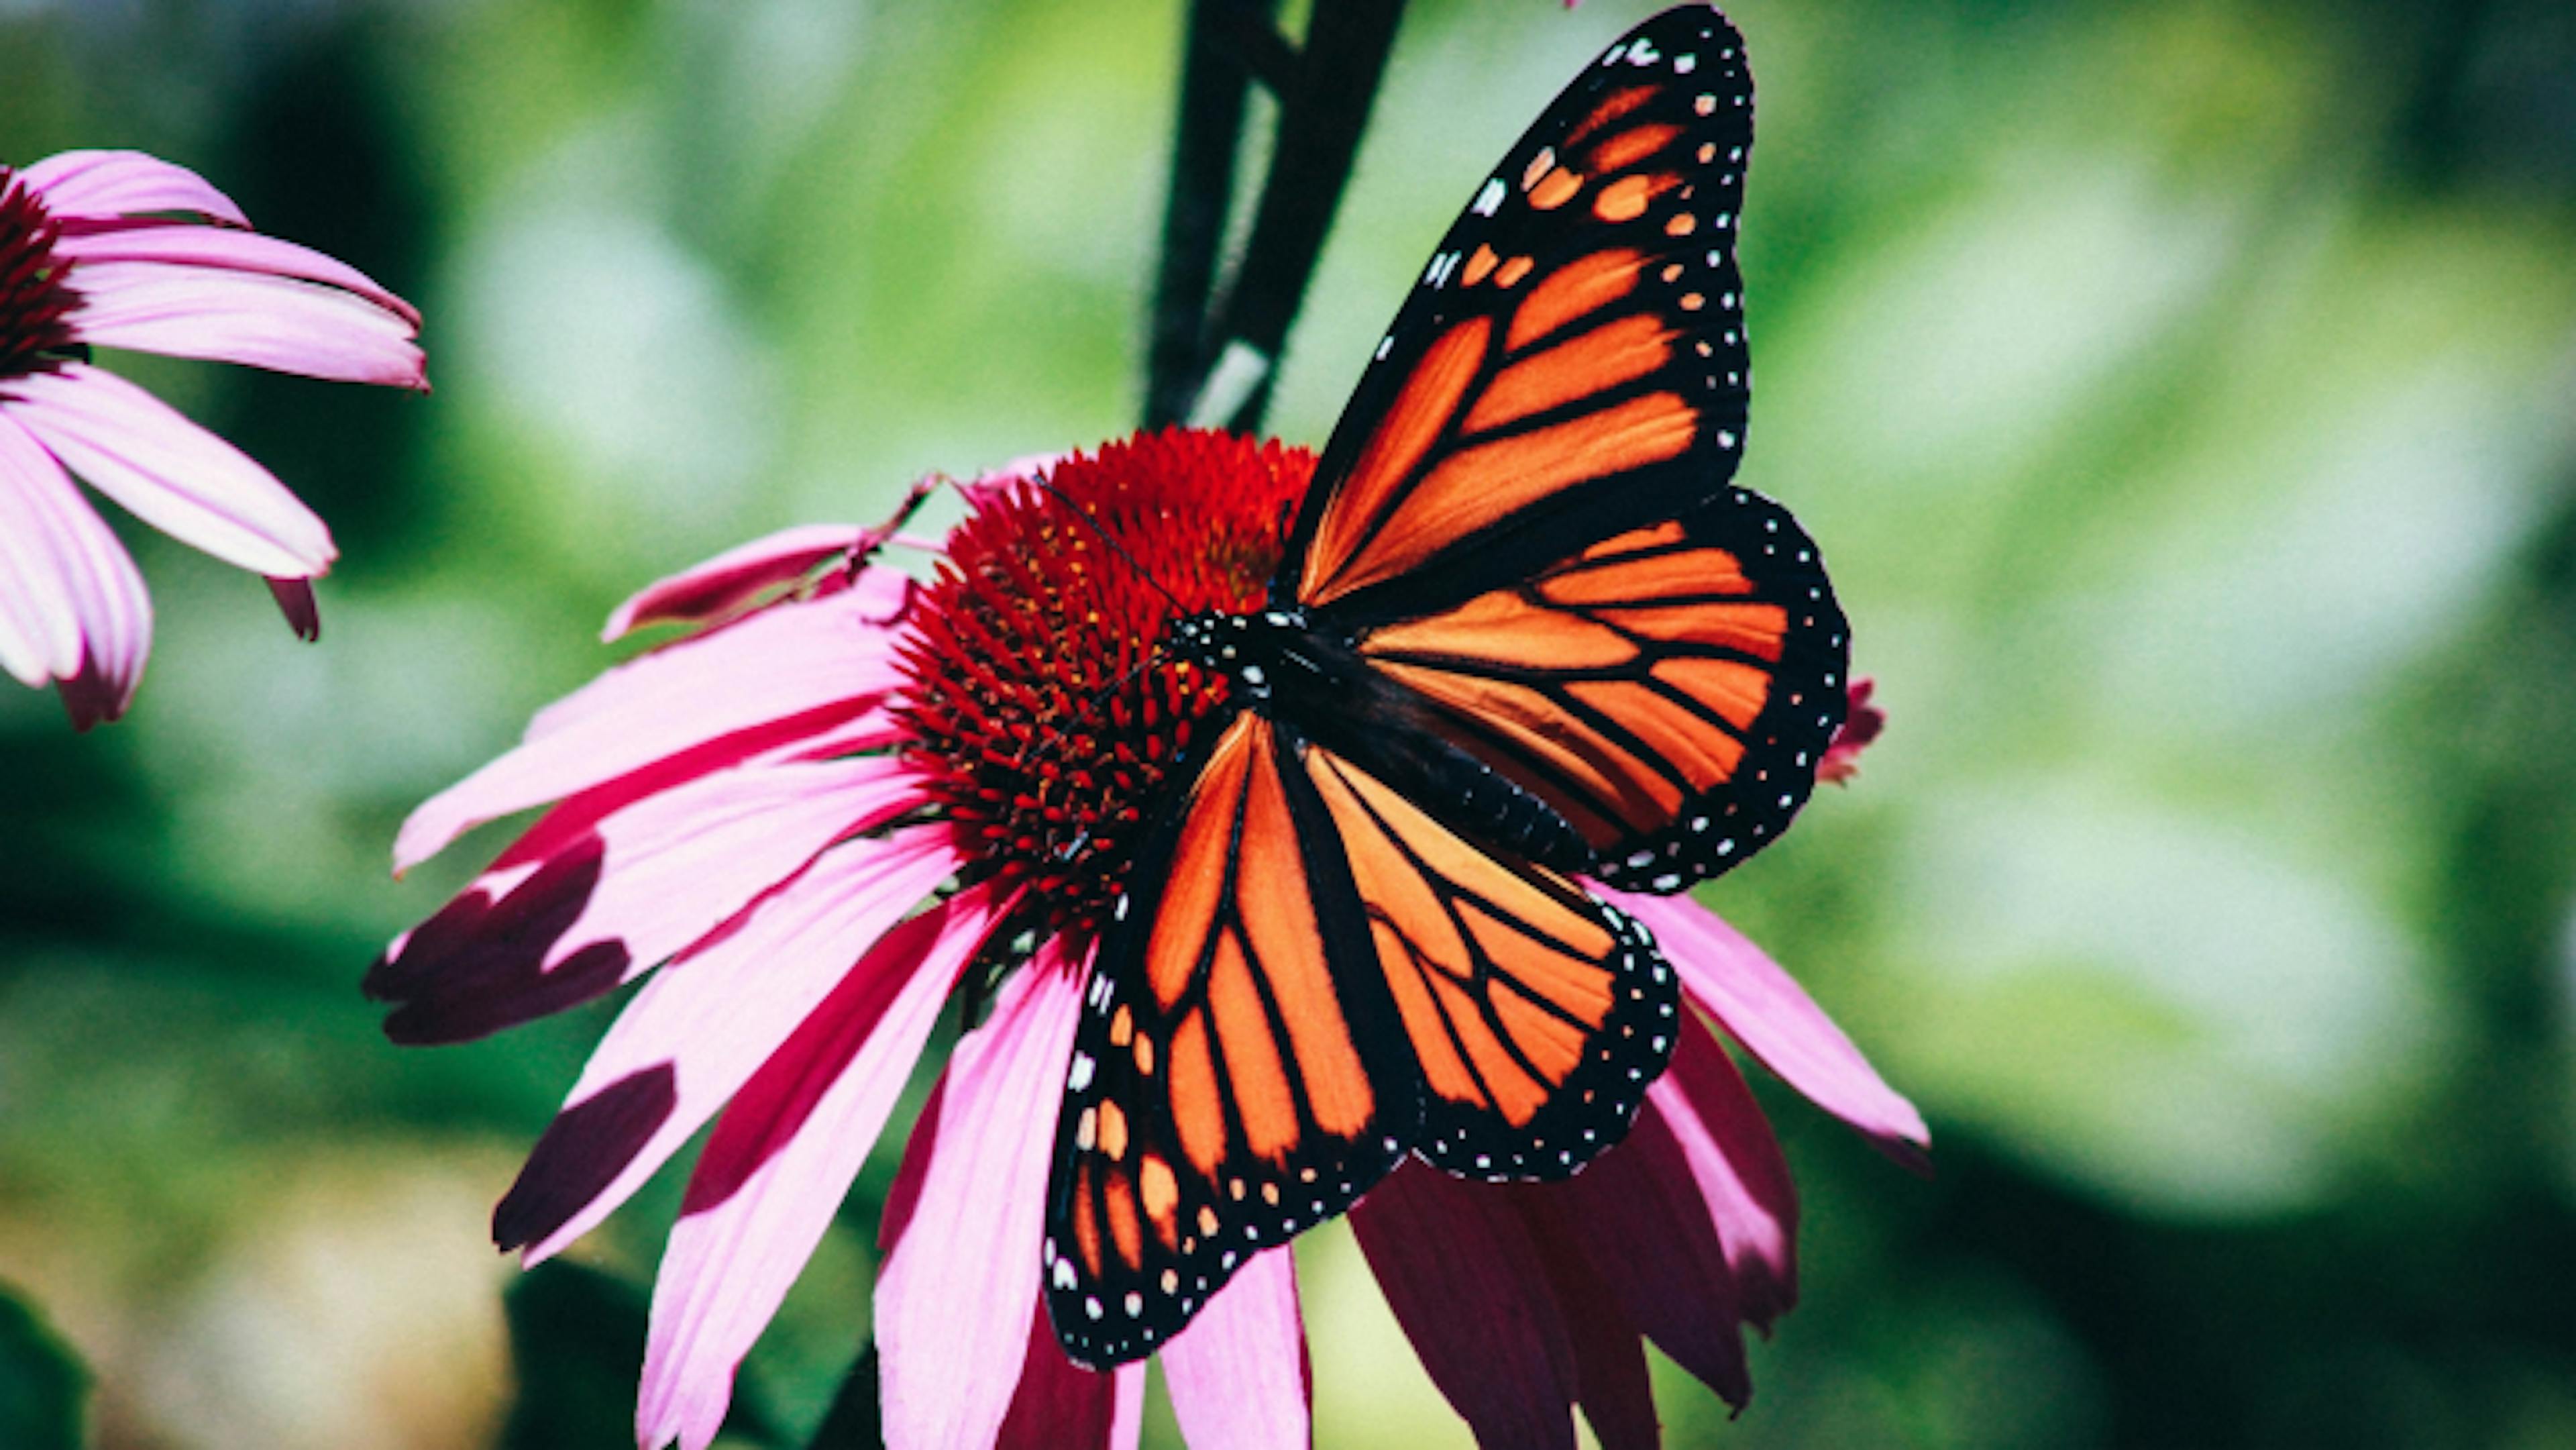 Monarch butterflies are beautiful and essential.